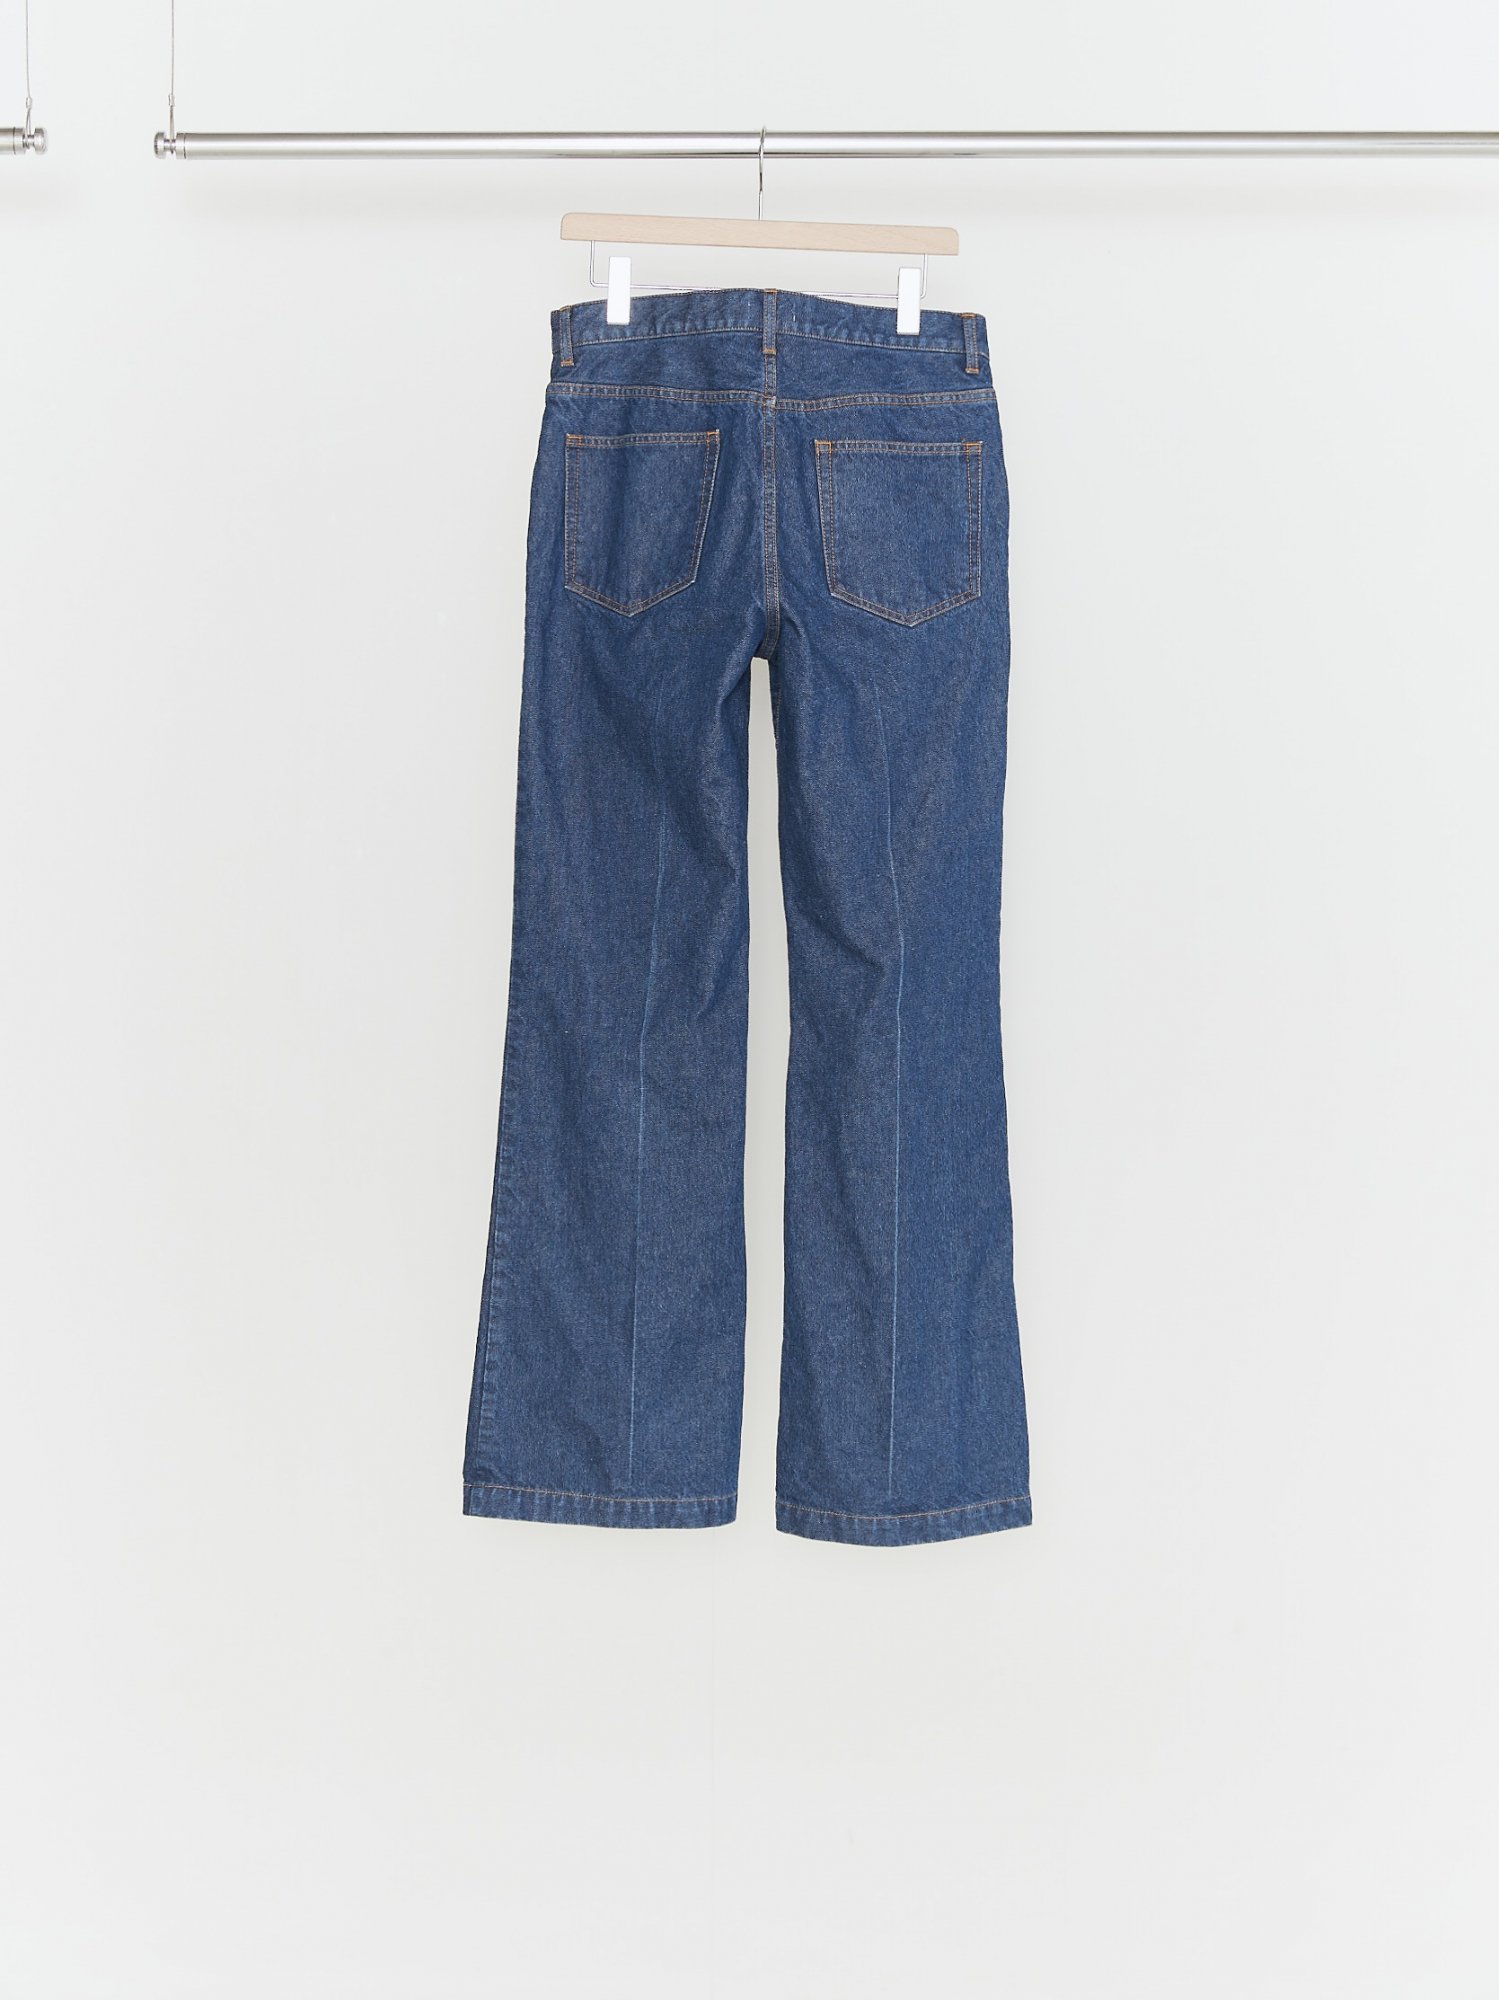 ALLEGE<br />Semi Flear Denim Pants / BLUE<img class='new_mark_img2' src='https://img.shop-pro.jp/img/new/icons14.gif' style='border:none;display:inline;margin:0px;padding:0px;width:auto;' />